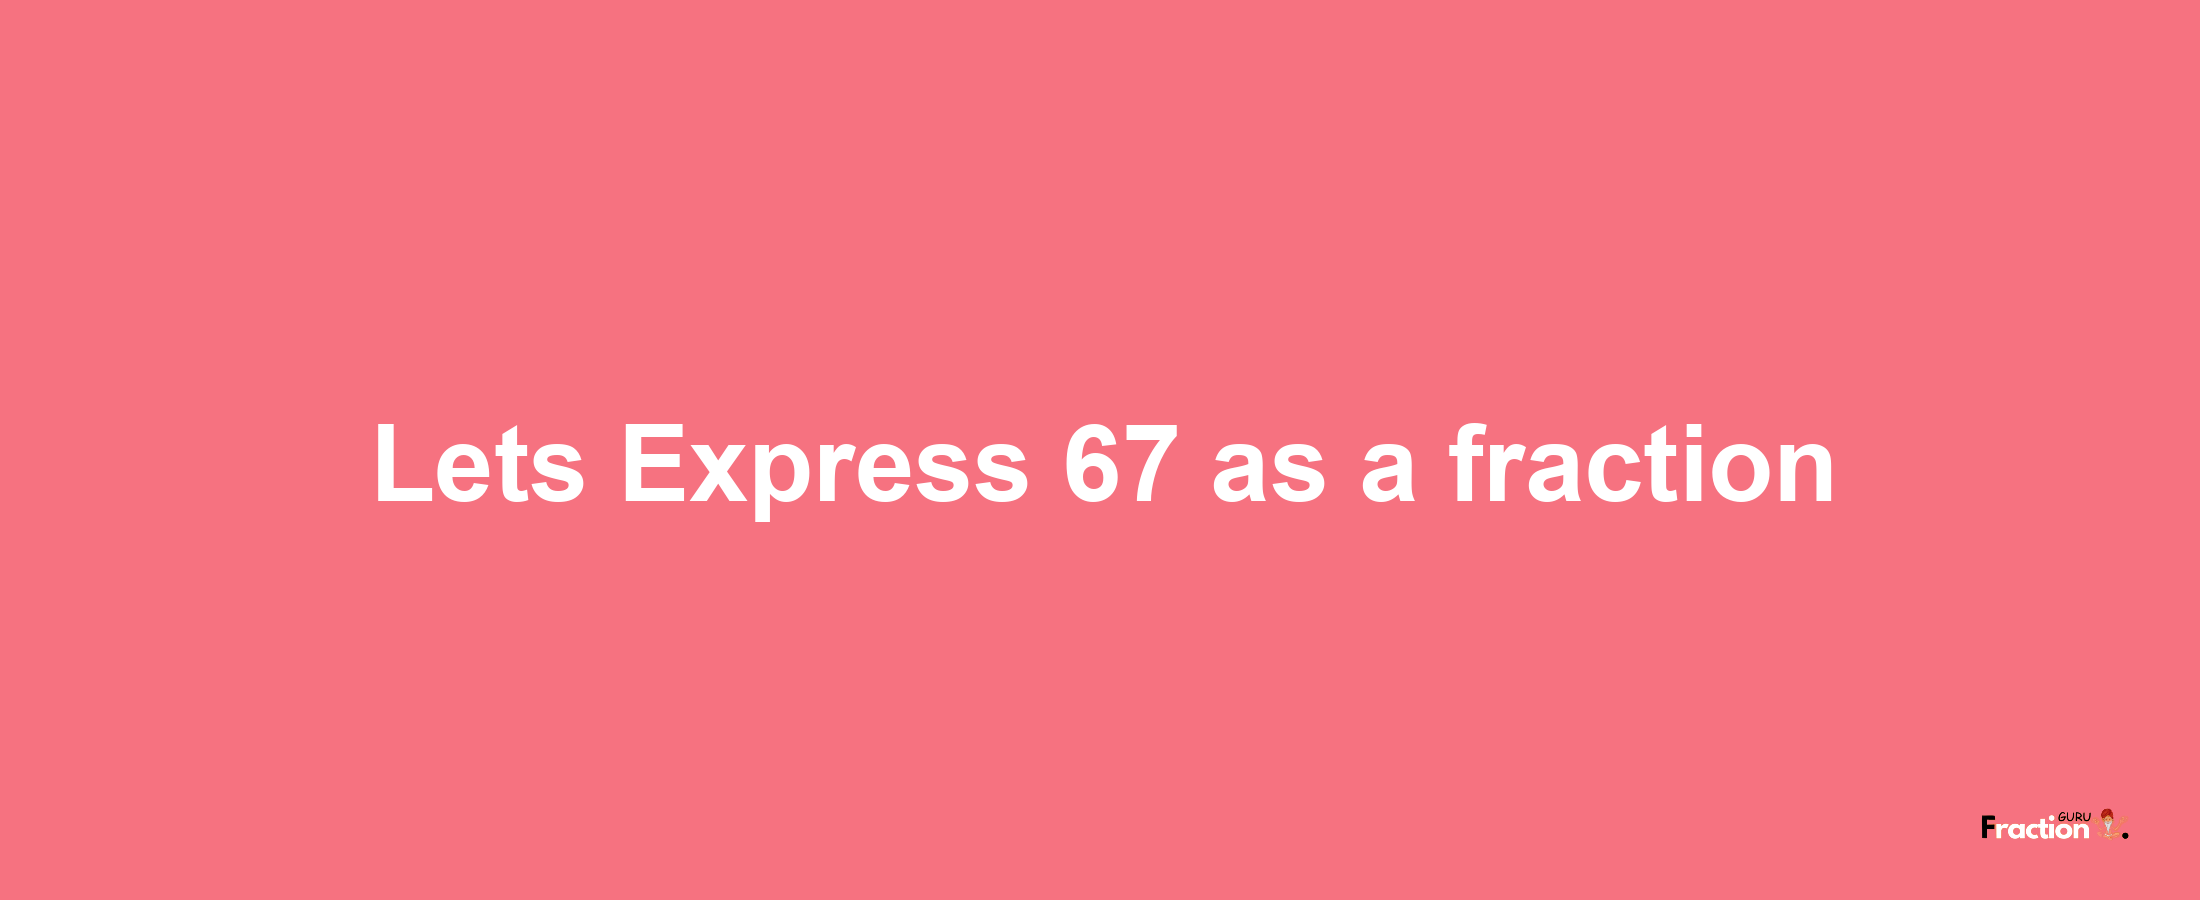 Lets Express 67 as afraction